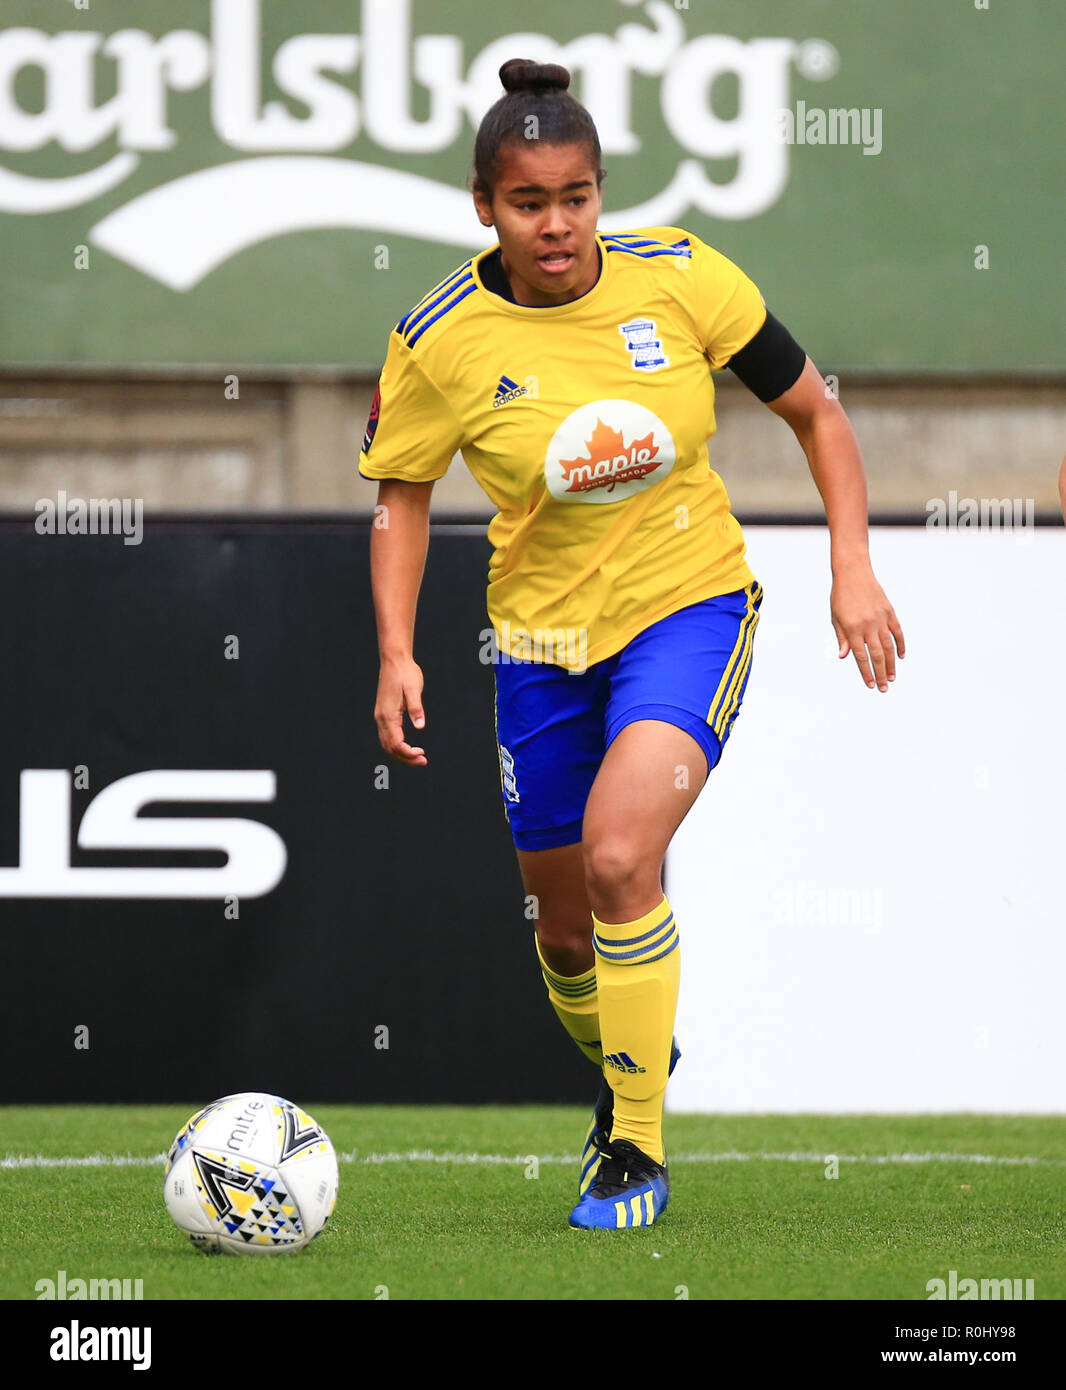 Birmingham, UK. 5th November, 2018. Birmingham City Women FC have announced that their midfielder SHANIA HAYLES has been called up for the Lionesses' U21 squad for the upcoming November training camp. Peter Lopeman/Alamy Live News Stock Photo